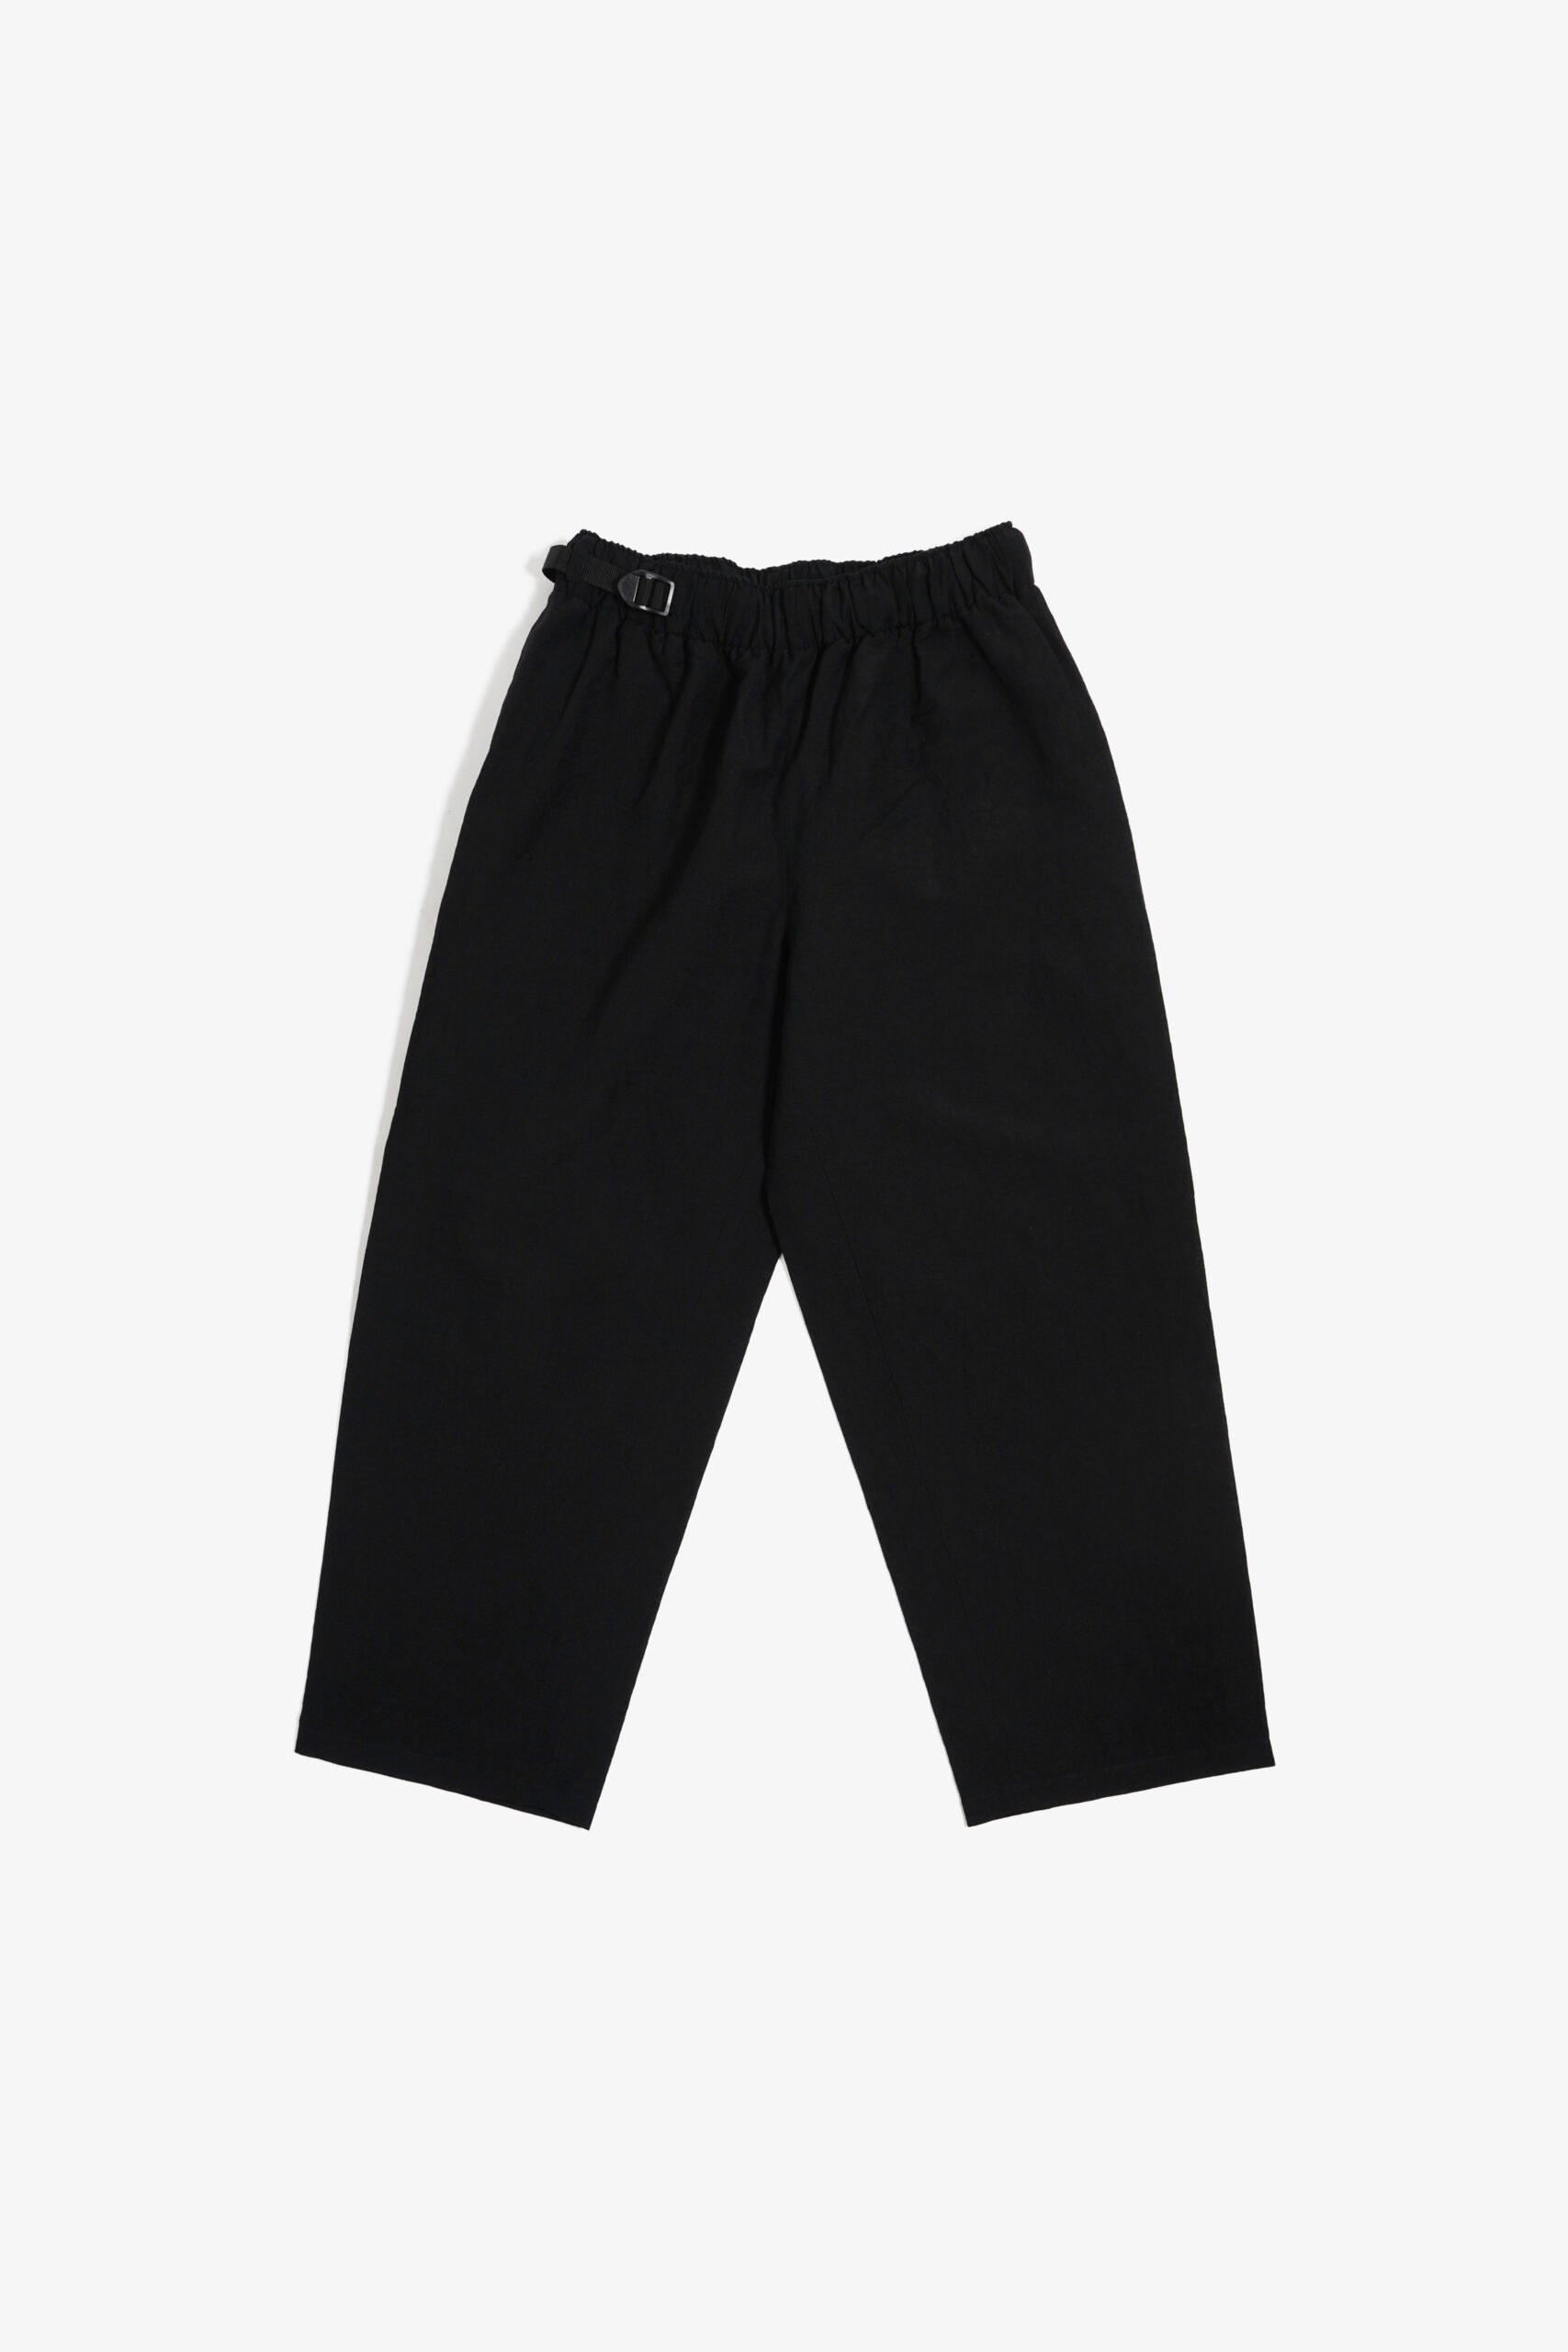 BELTED TROUSERS TYPE 3 - WOOL / LINEN